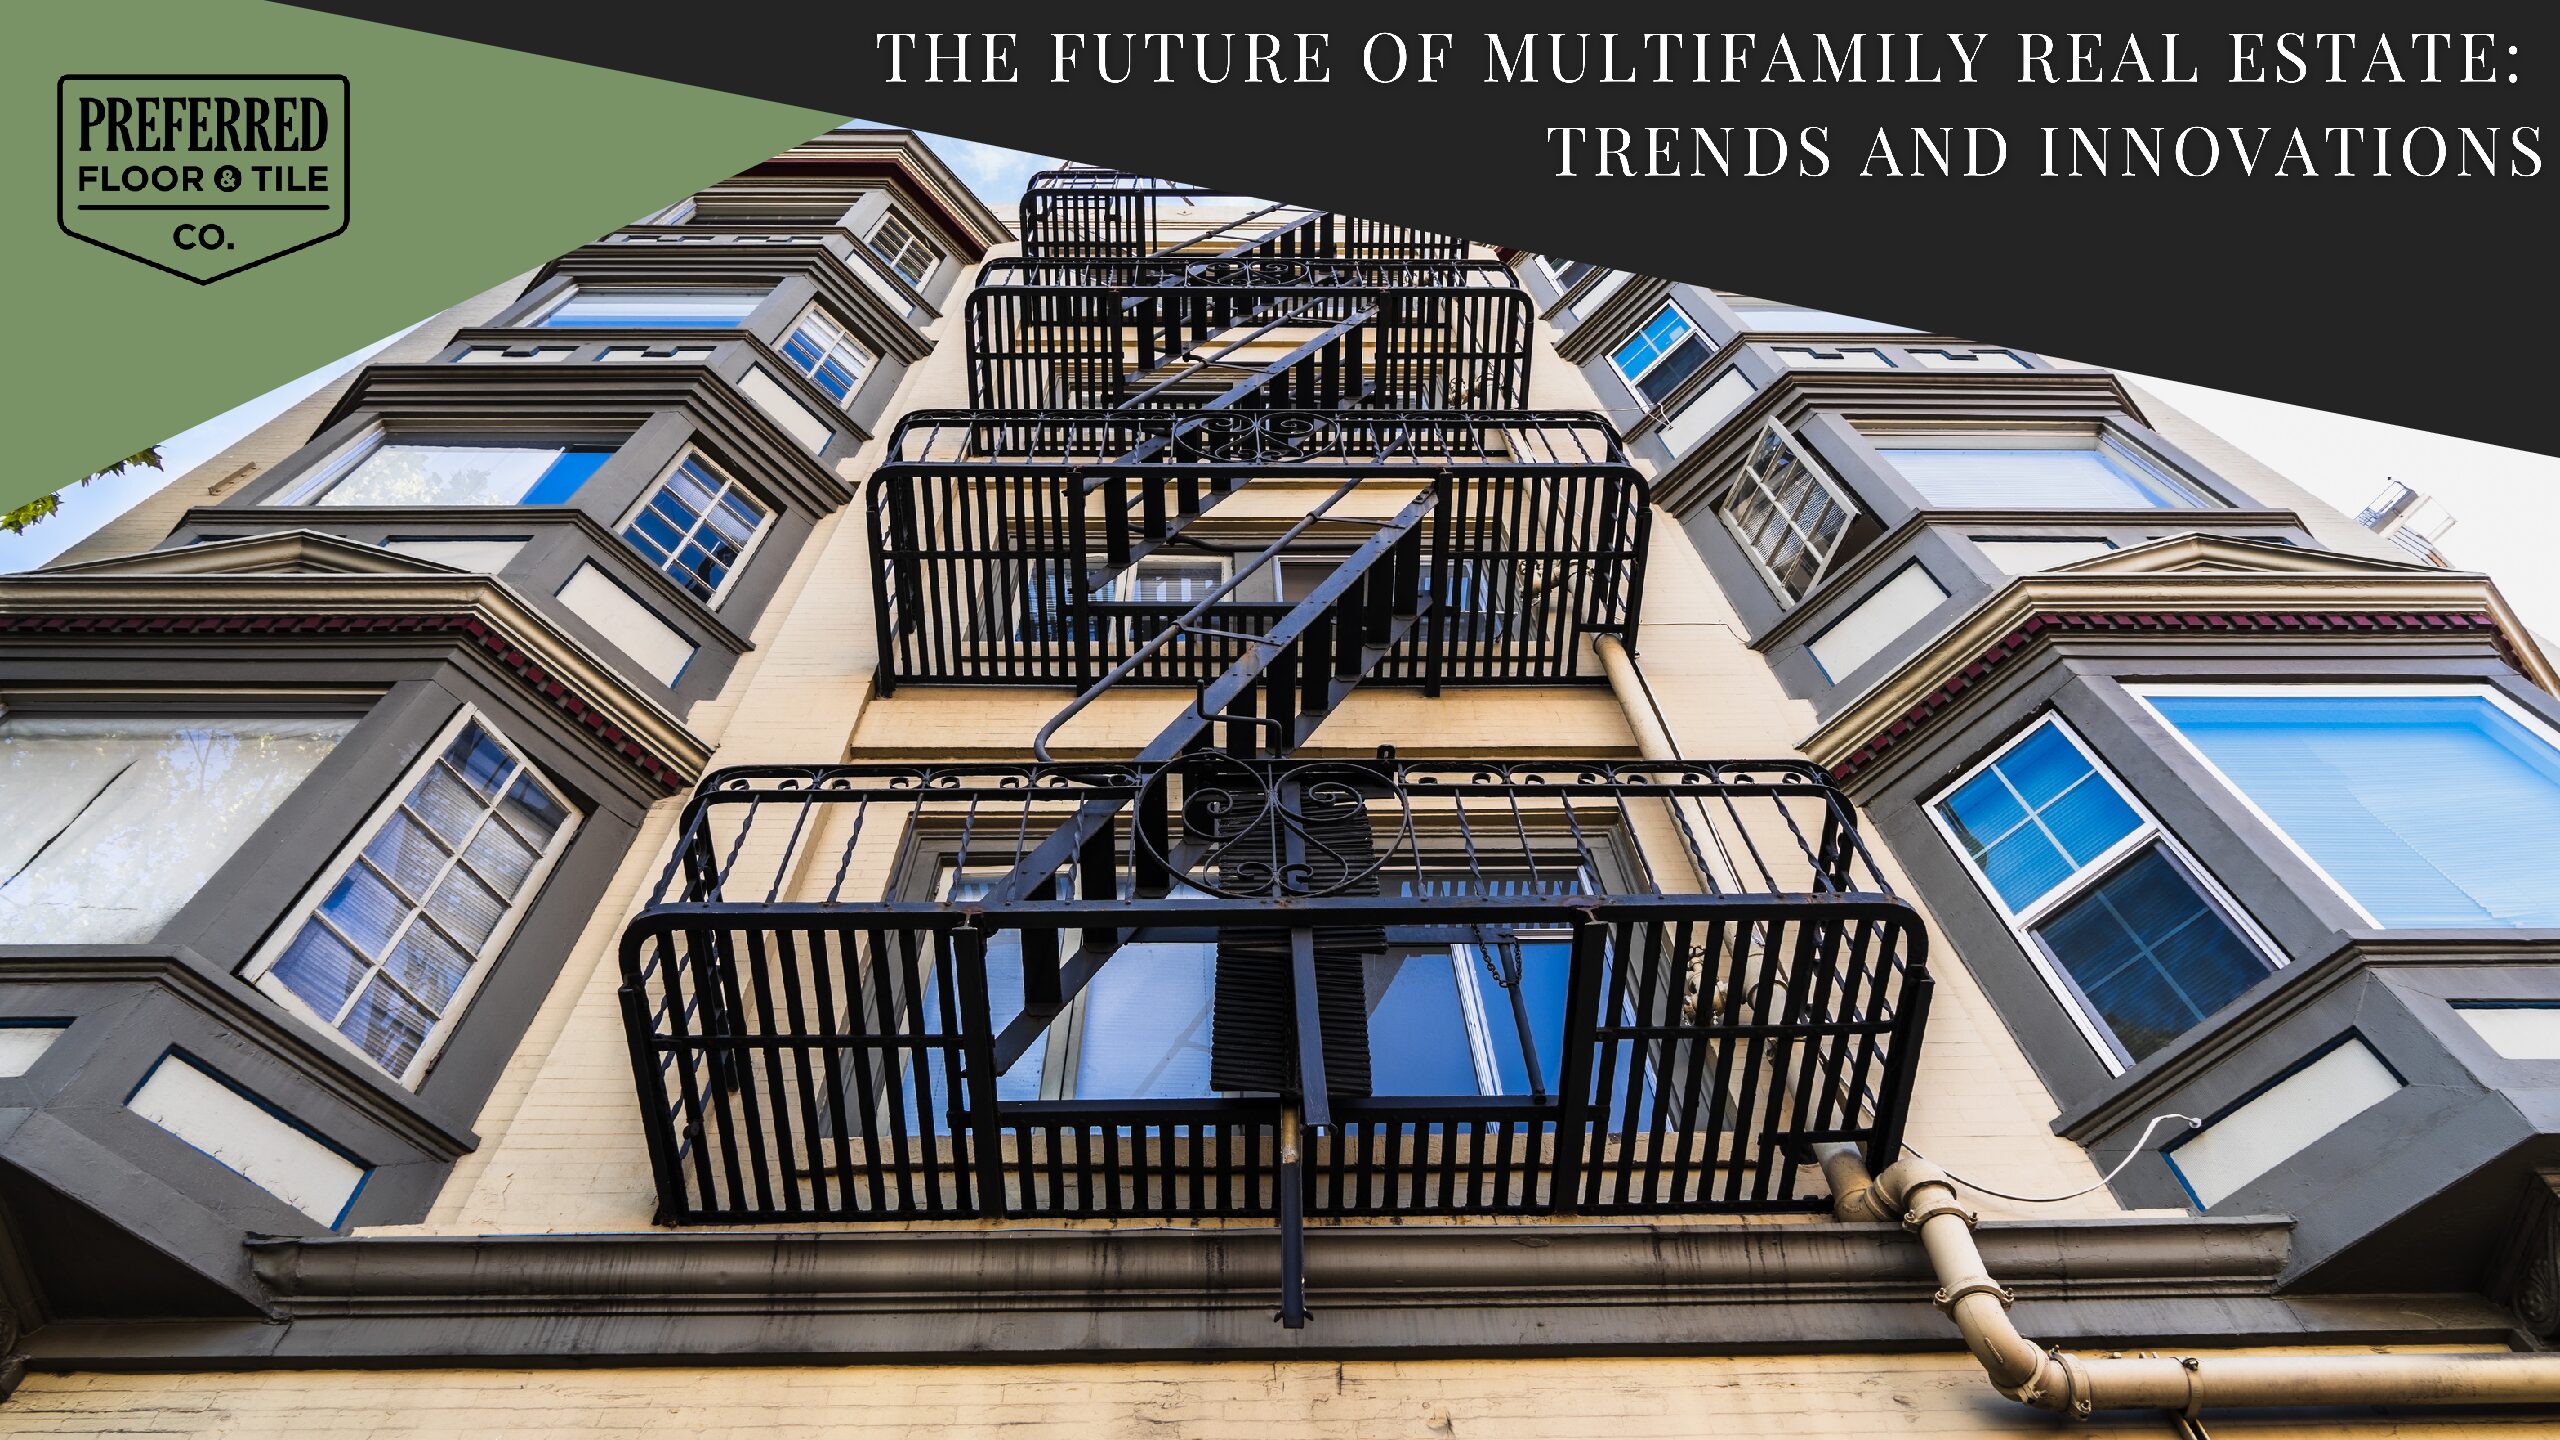 The Future of Multifamily Real Estate: Trends and Innovations